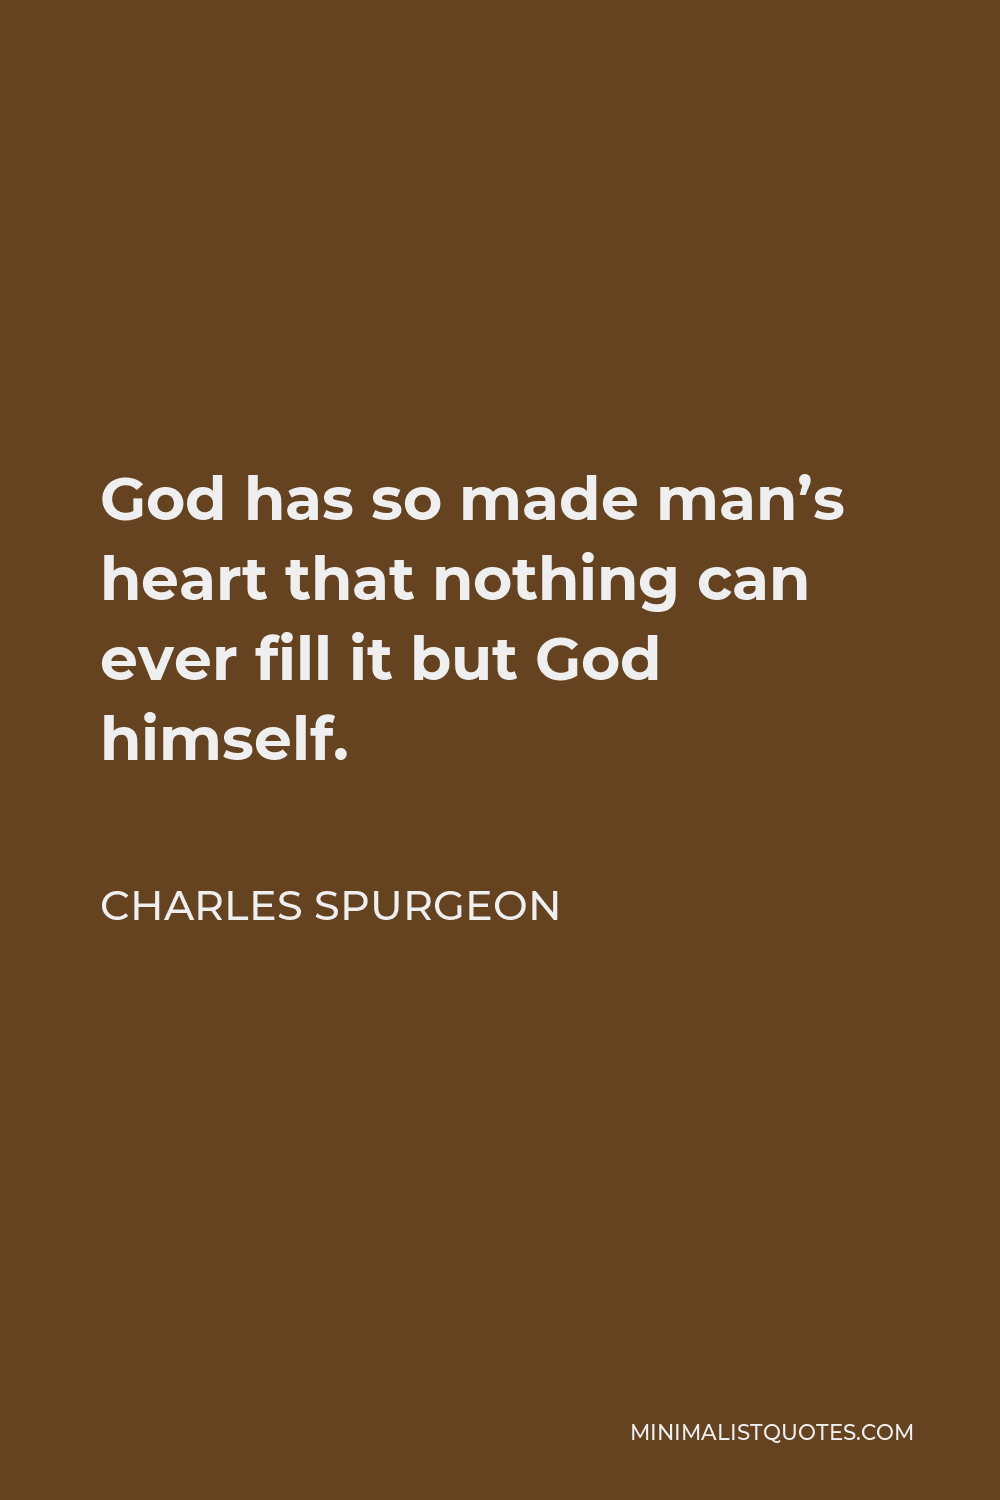 Charles Spurgeon Quote - God has so made man’s heart that nothing can ever fill it but God himself.